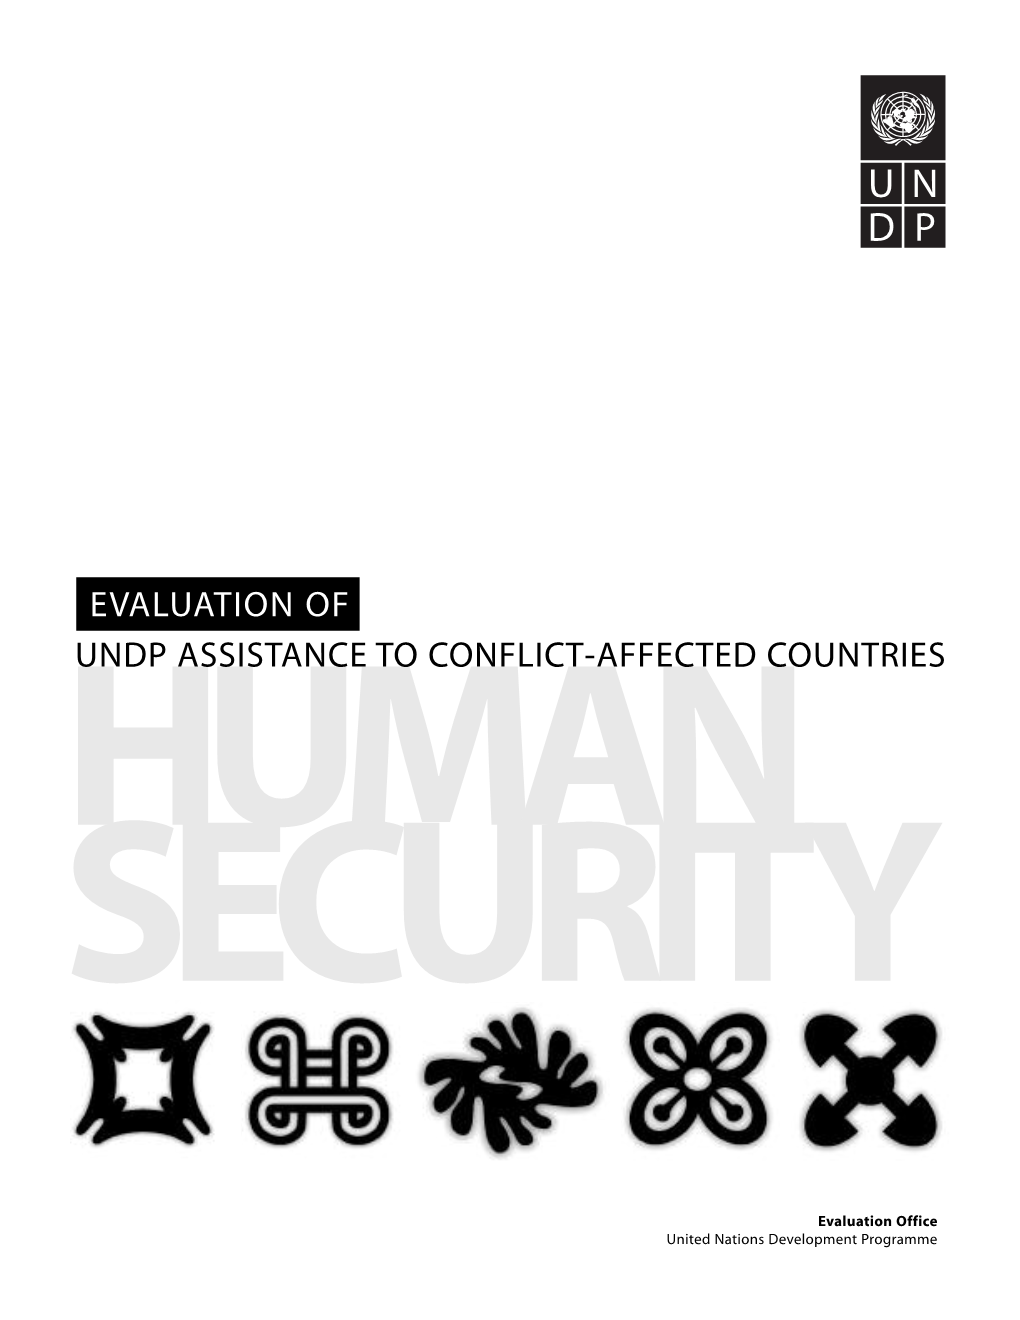 Undp Assistance to Conflict-Affected Countries Security